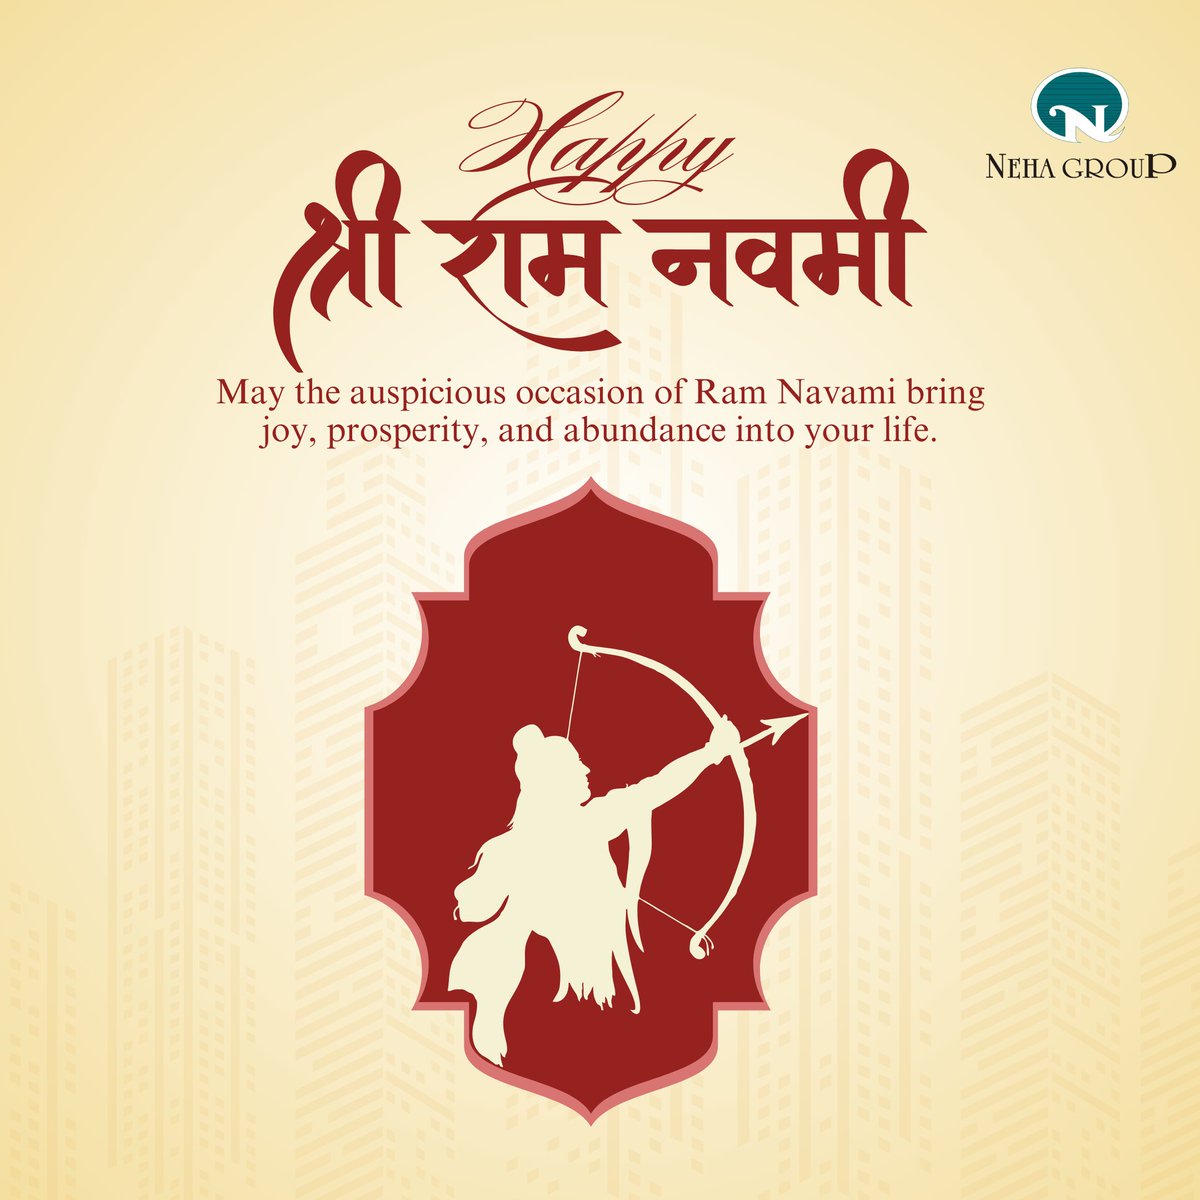 🌟 Wishing you all a blissful Ram Navami filled with divine blessings and joy! 🙏✨
.
.
.
.
#HappyRamNavami #NehaGroup #Ram #MiraRoad #RealEstate